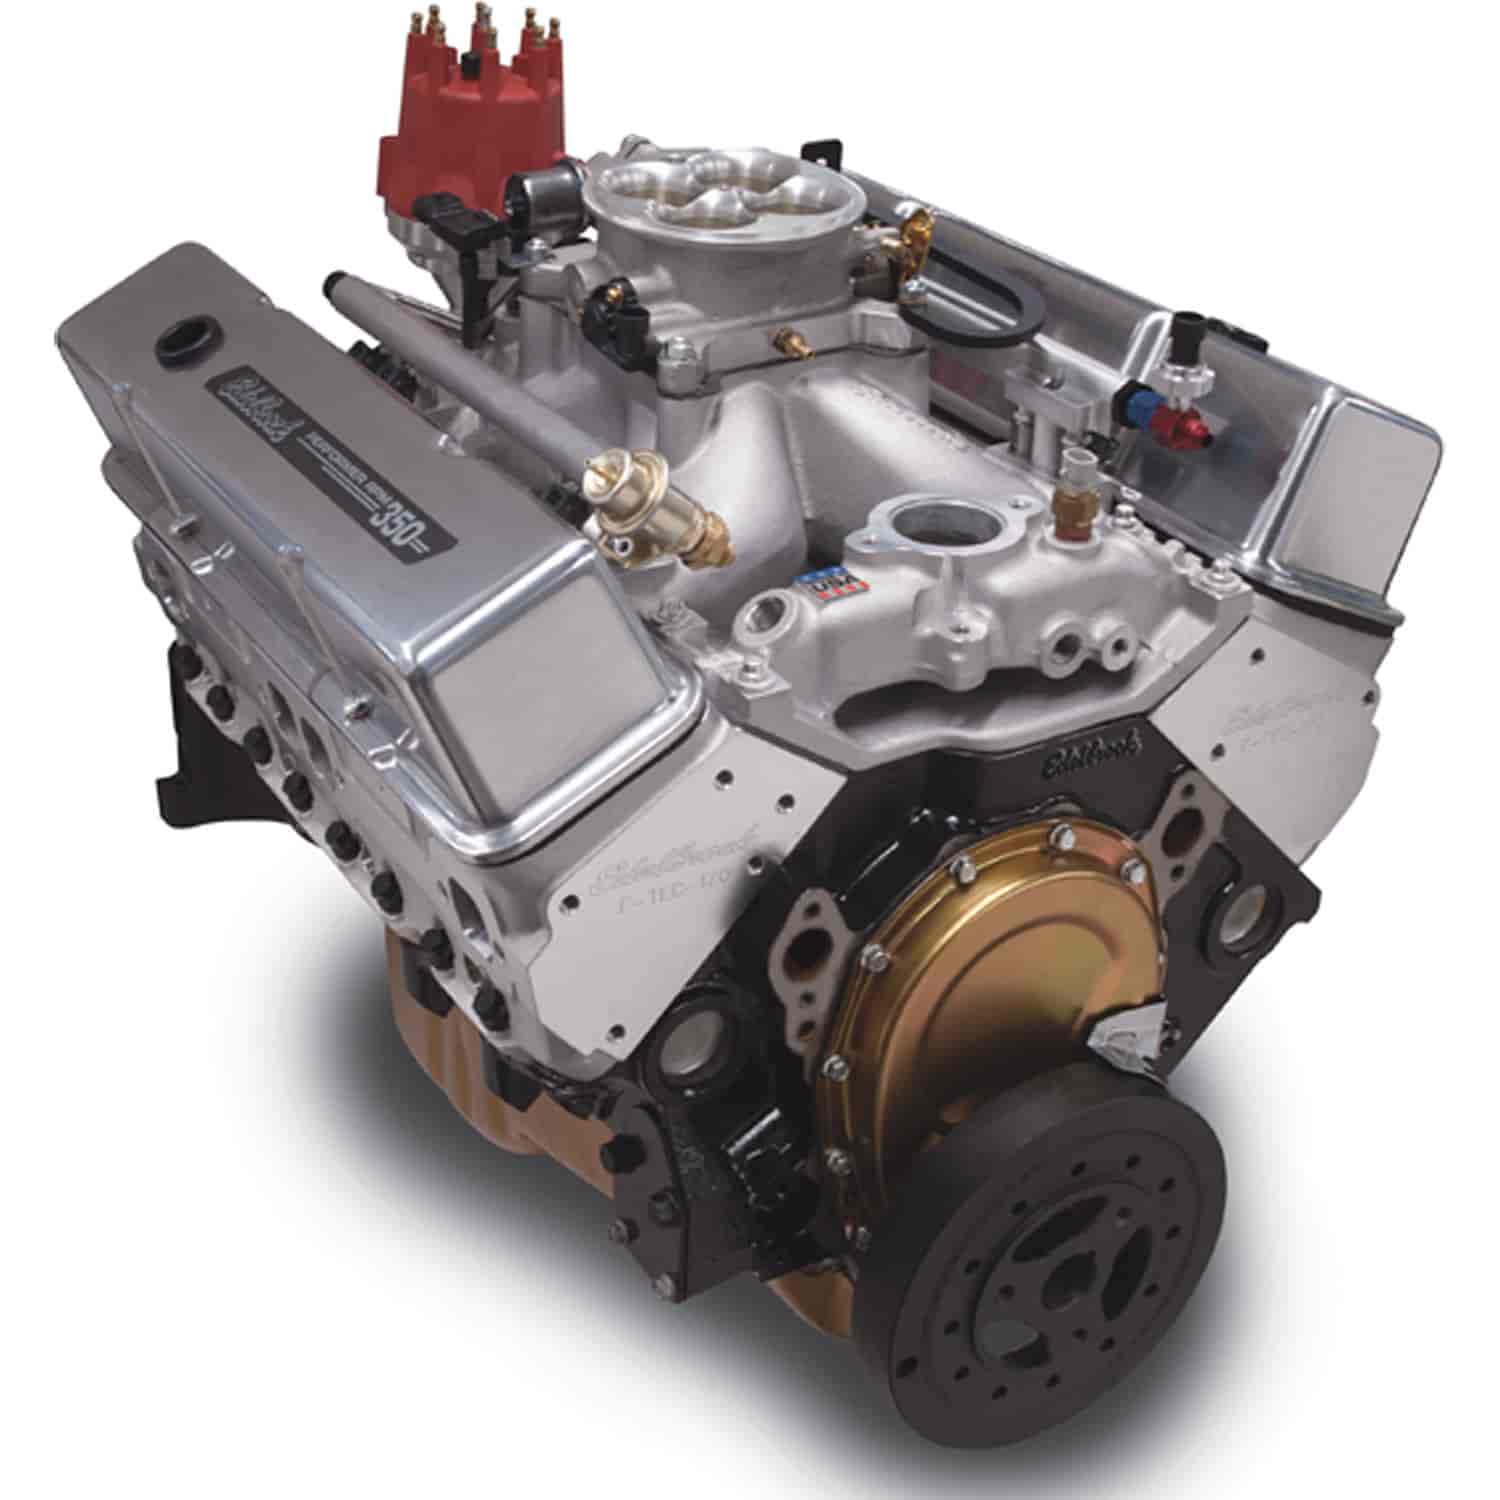 Performer RPM E-Tec Small Block Chevy 350ci / 440 hp Crate Engine with RPM Air-Gap Intake & Pro-Flo 3 EFI